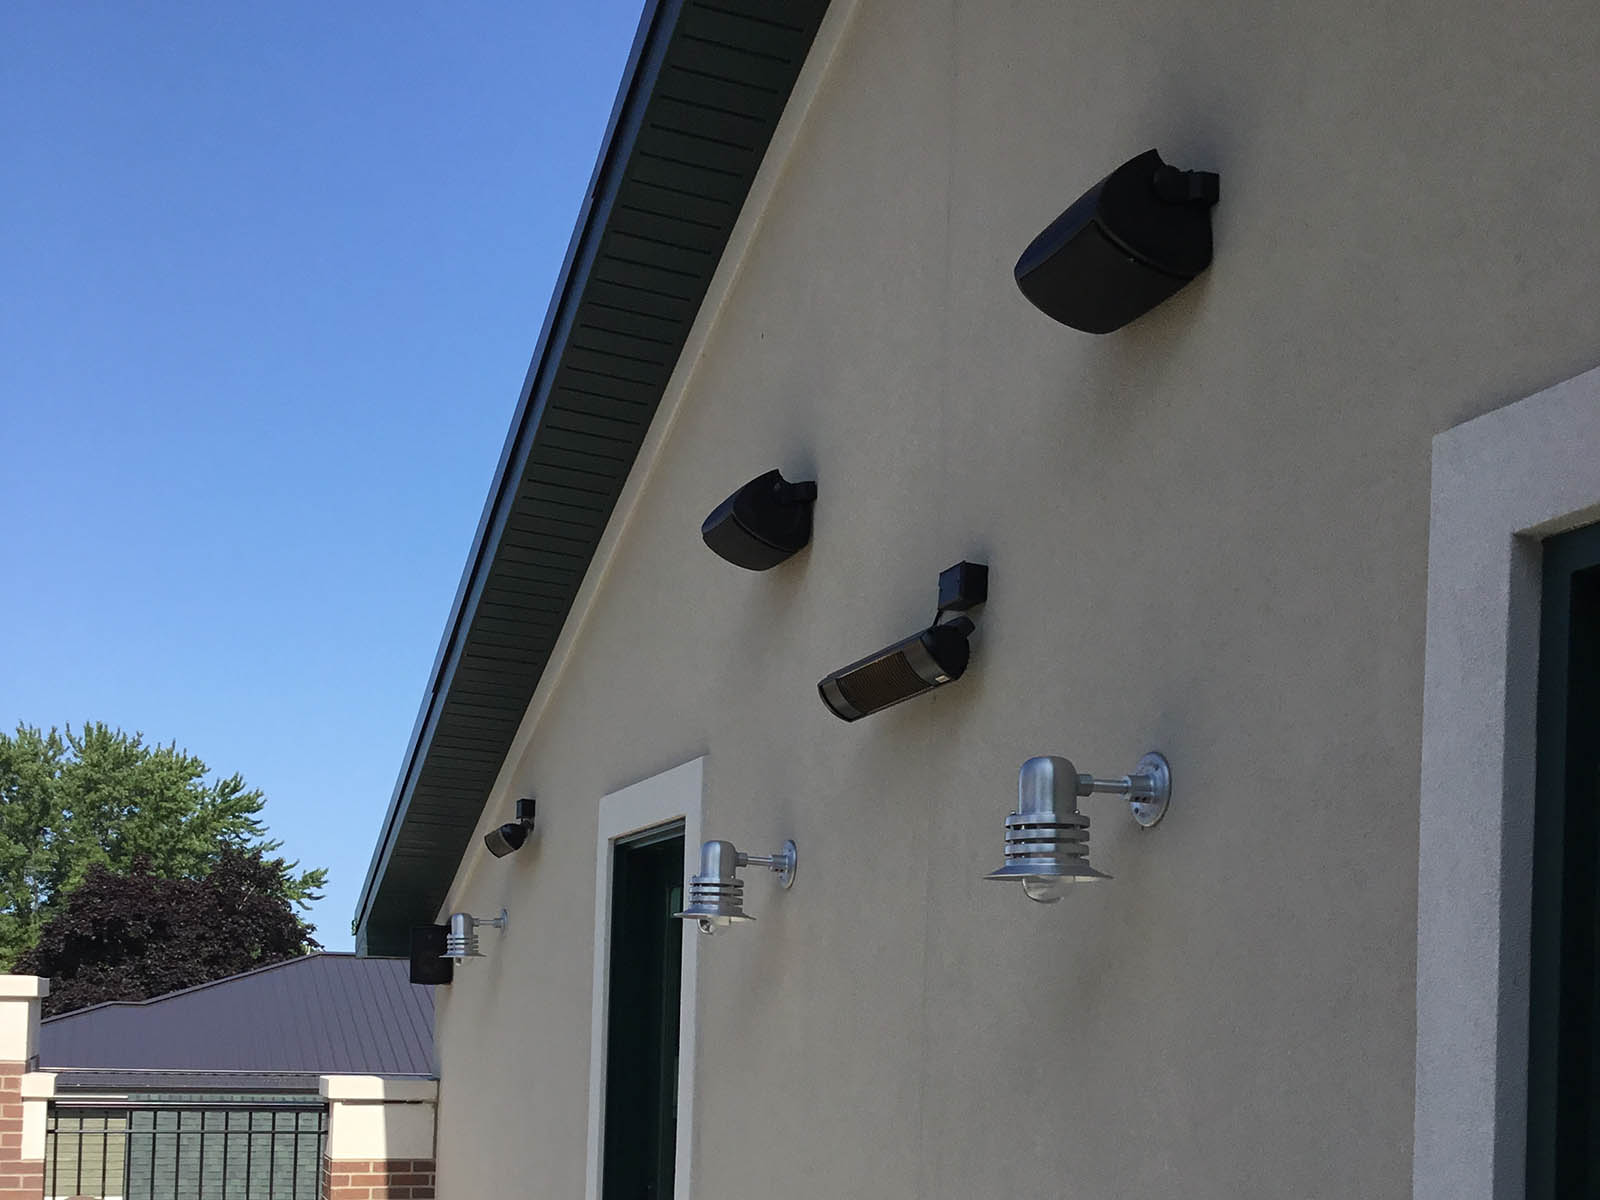 Exterior speaker system and lighting mounted on a wall to provide sound and light to upper level patio